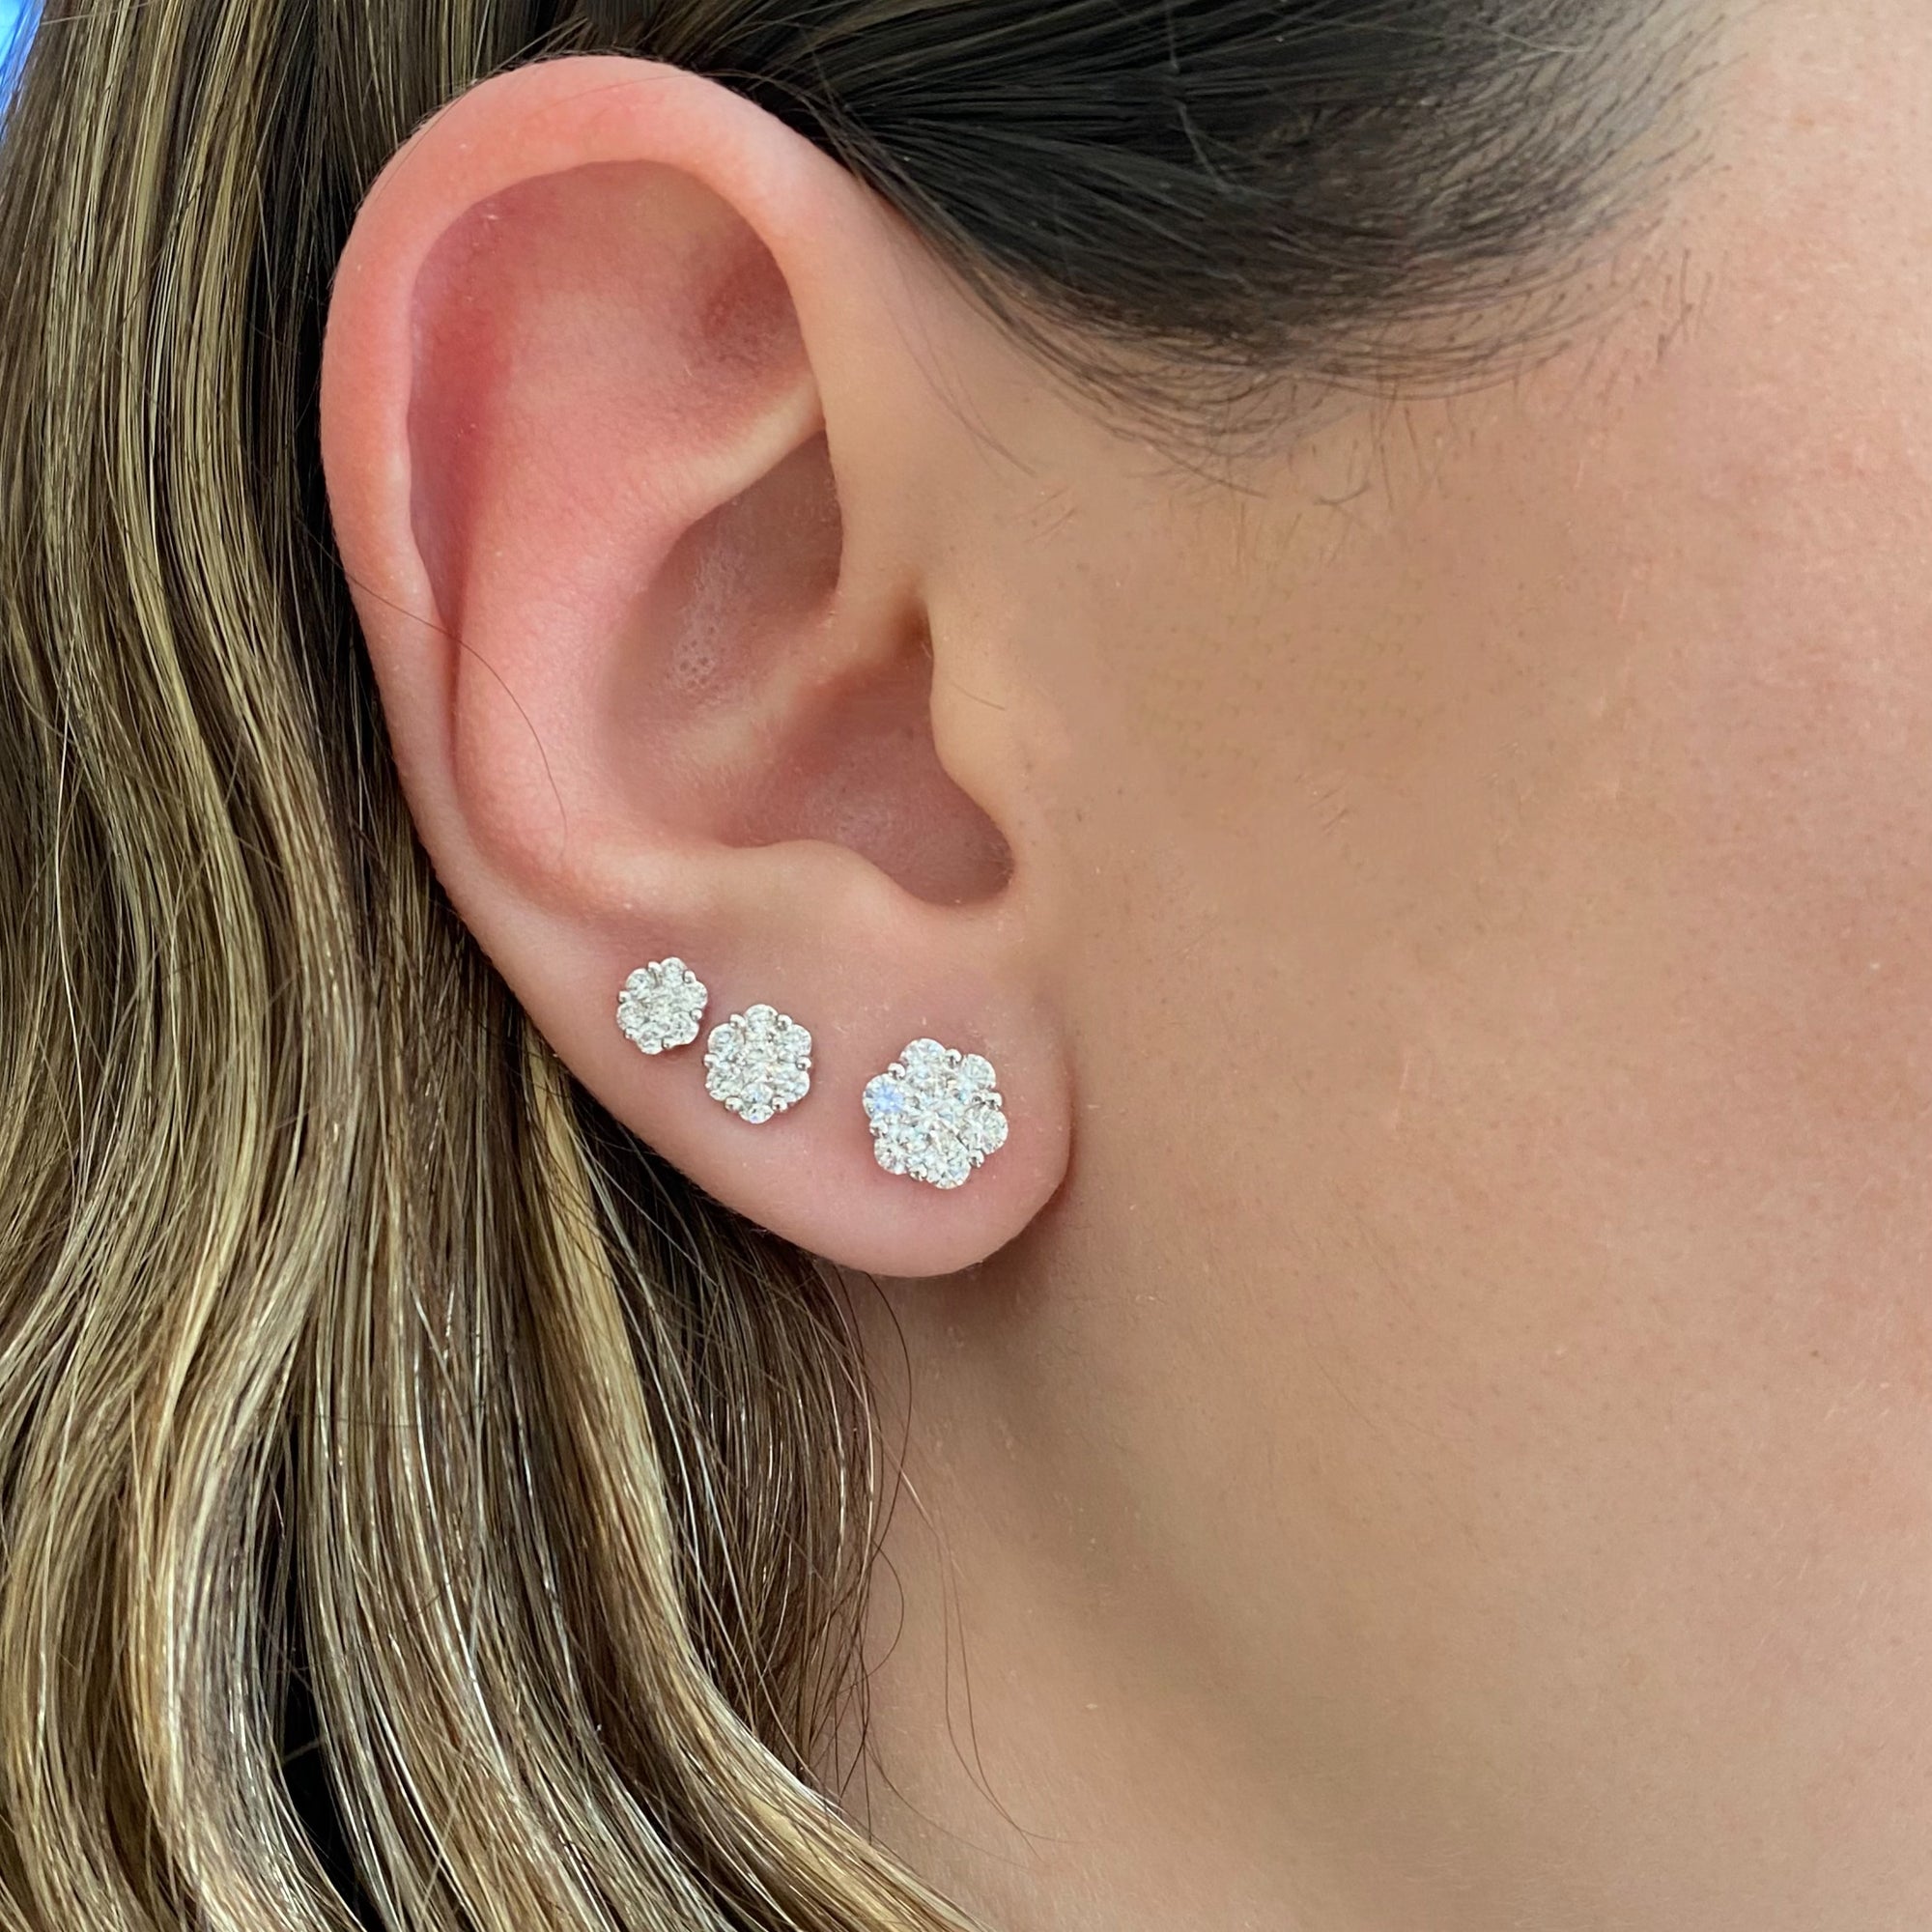 1.06 ct Diamond Cluster Stud Earrings - 18K white gold weighing 1.87 grams  - 2 round diamonds weighing 0.22 carats  - 12 round diamonds weighing 0.84 carats